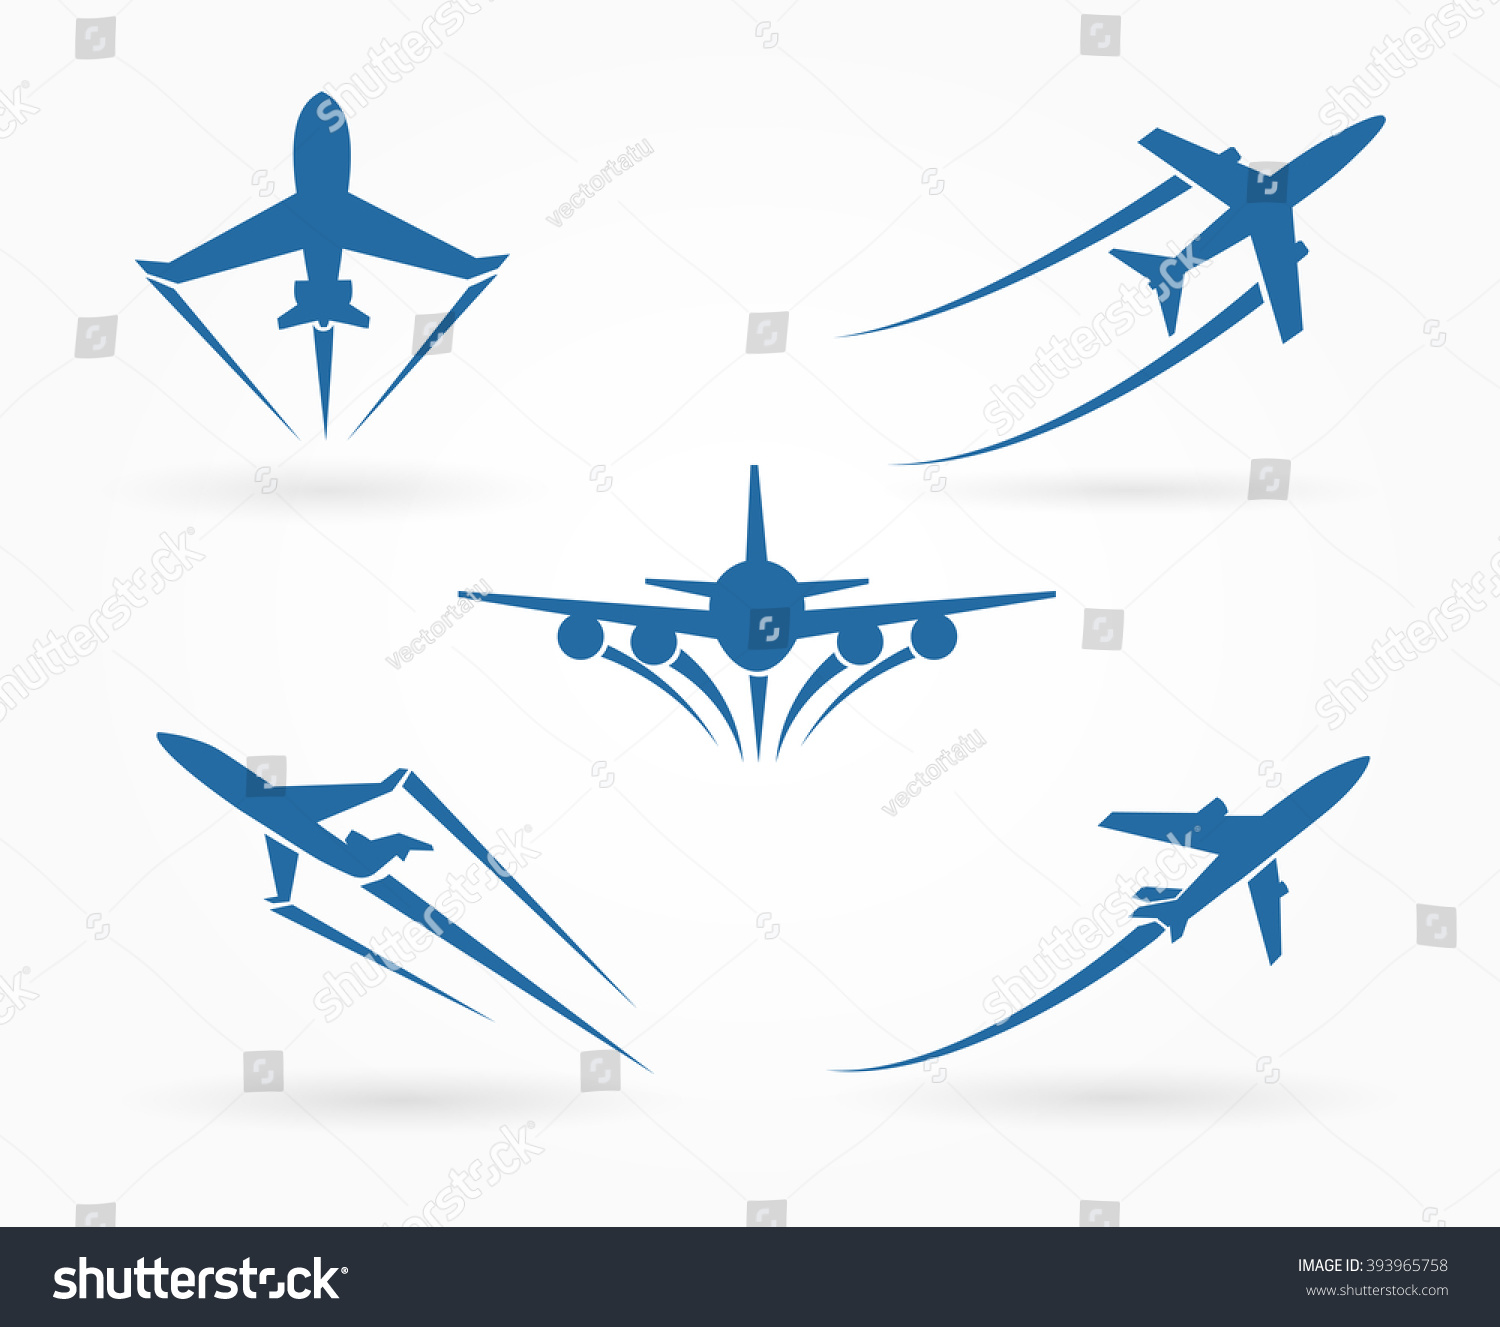 airplane clipart black and white takeoff - photo #44